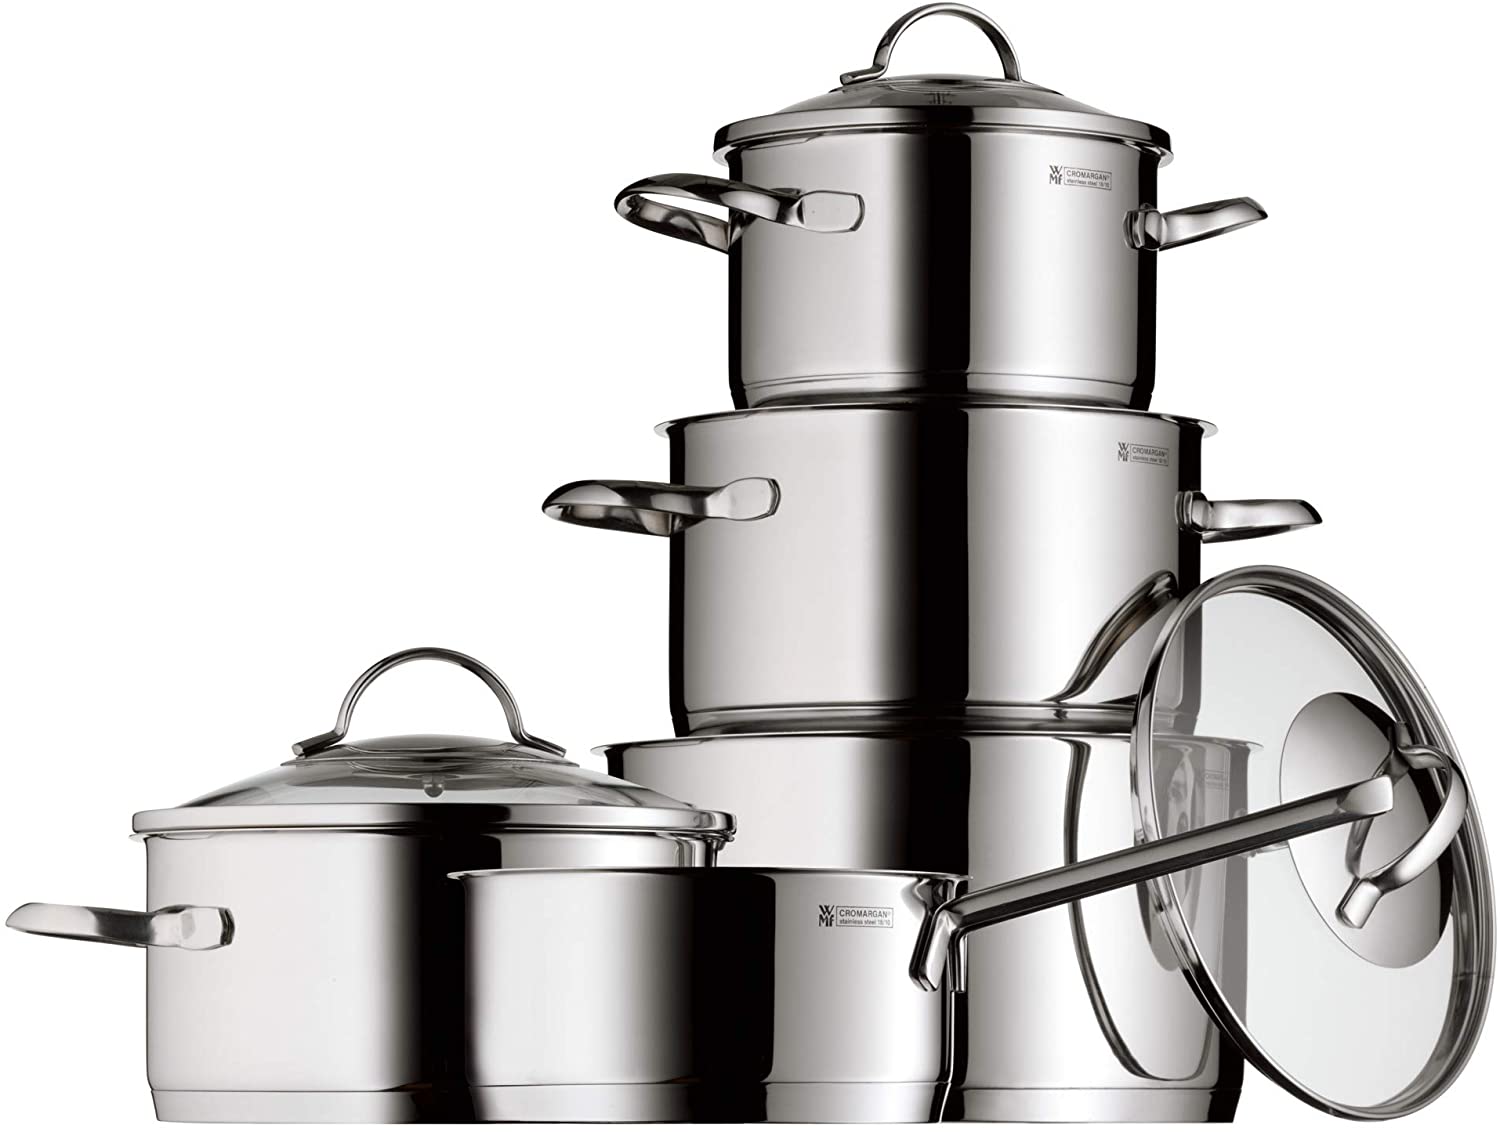 WMF Provence Plus 5-Piece Cookware Set with Glass Lids, Polished Cromargan Stainless Steel Cooking Pots & Saucepan